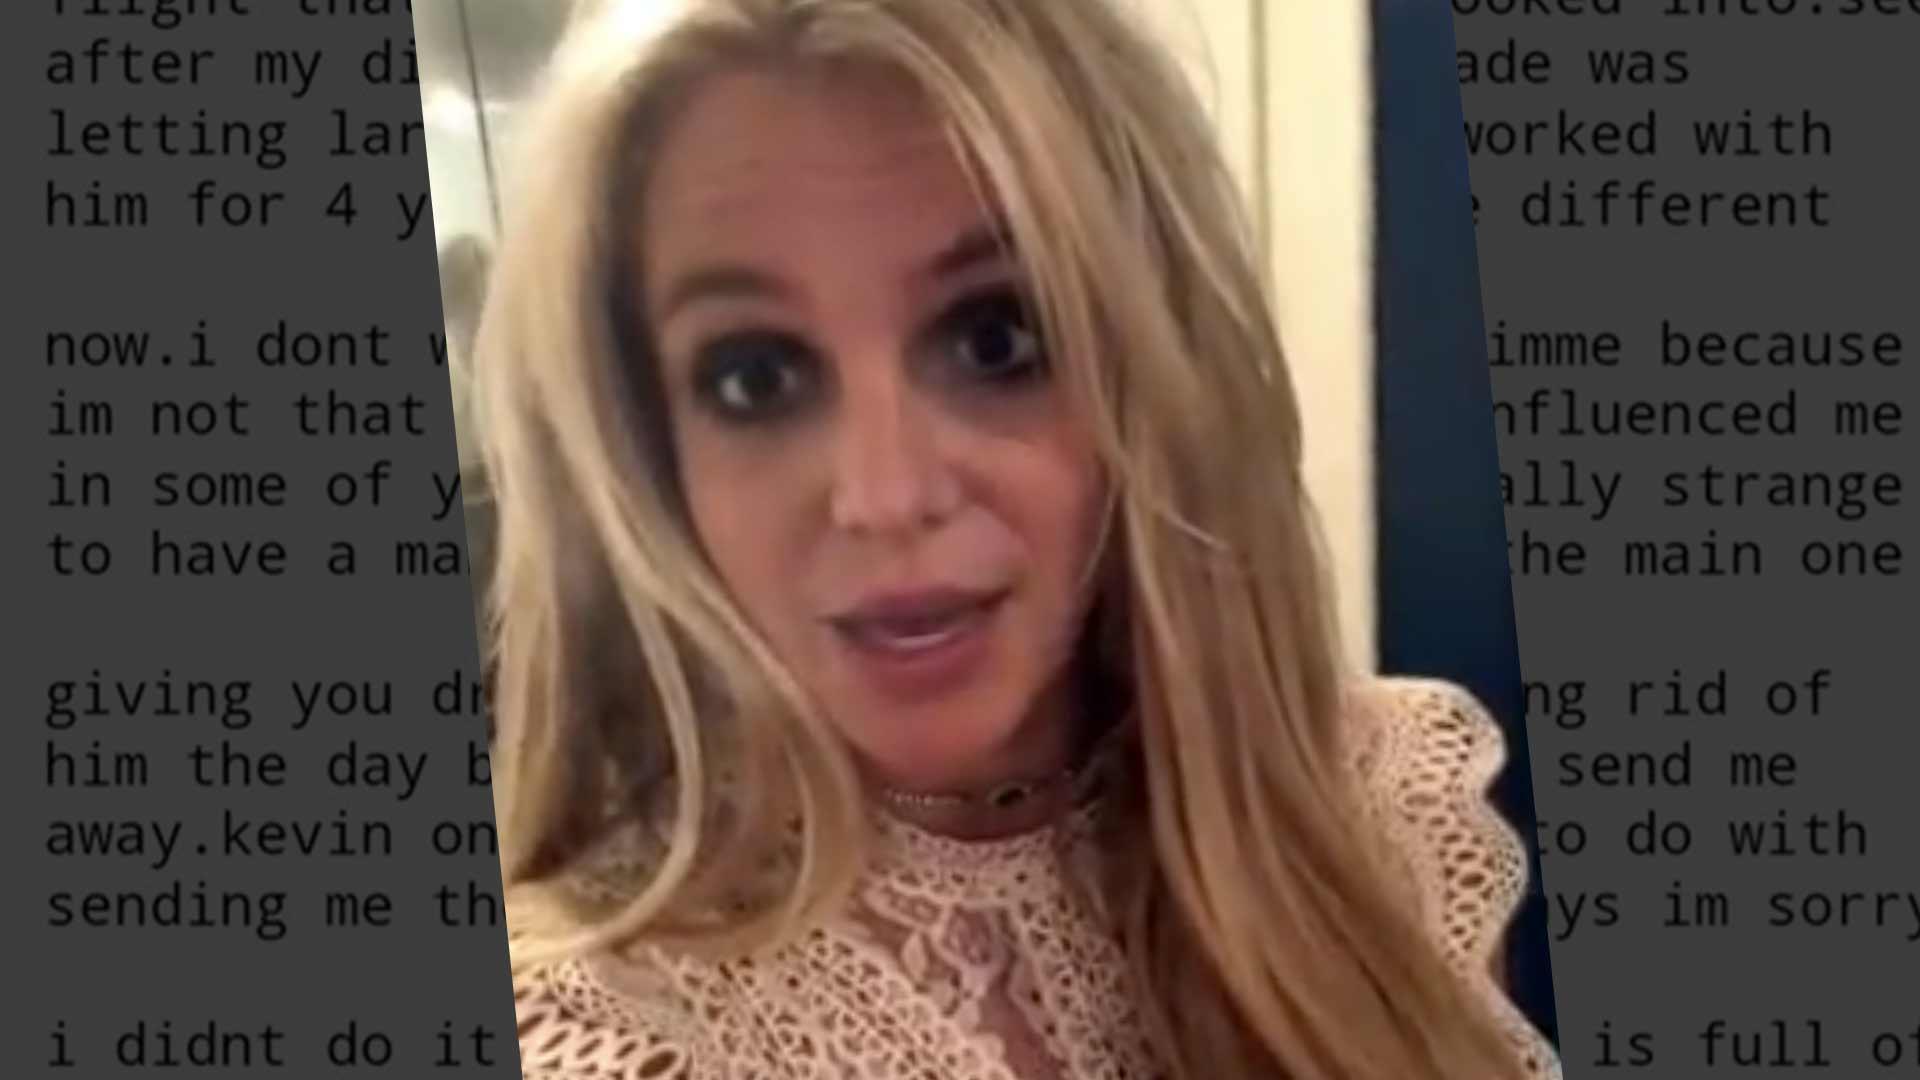 Britney Spears’ Alleged Leaked Emails Attack Father, Call Business Manager a ‘Stalker’